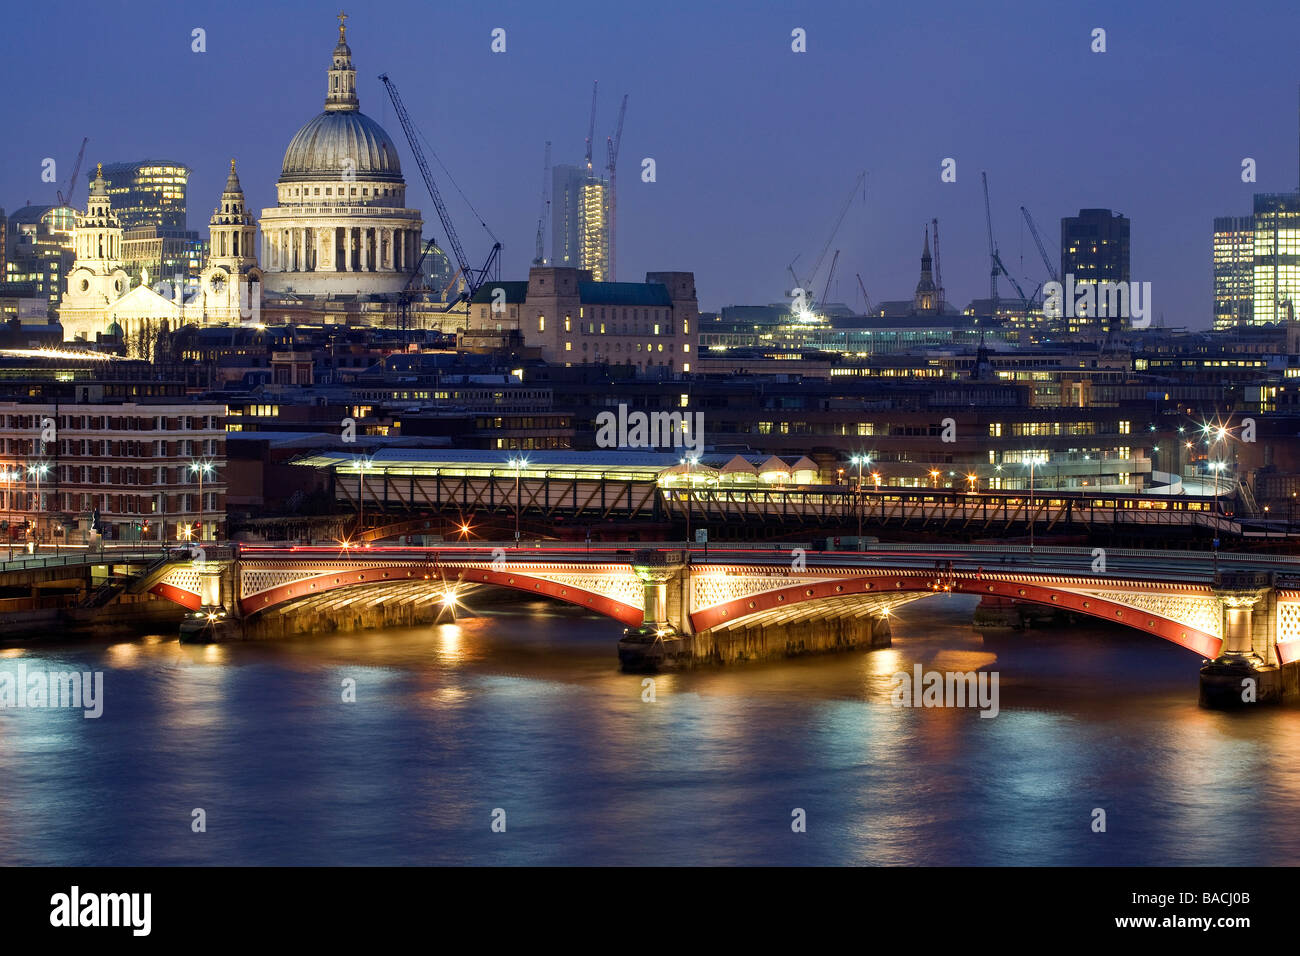 United Kingdom, London, Blackfriars Bridge and Saint Paul cathedral in the background Stock Photo